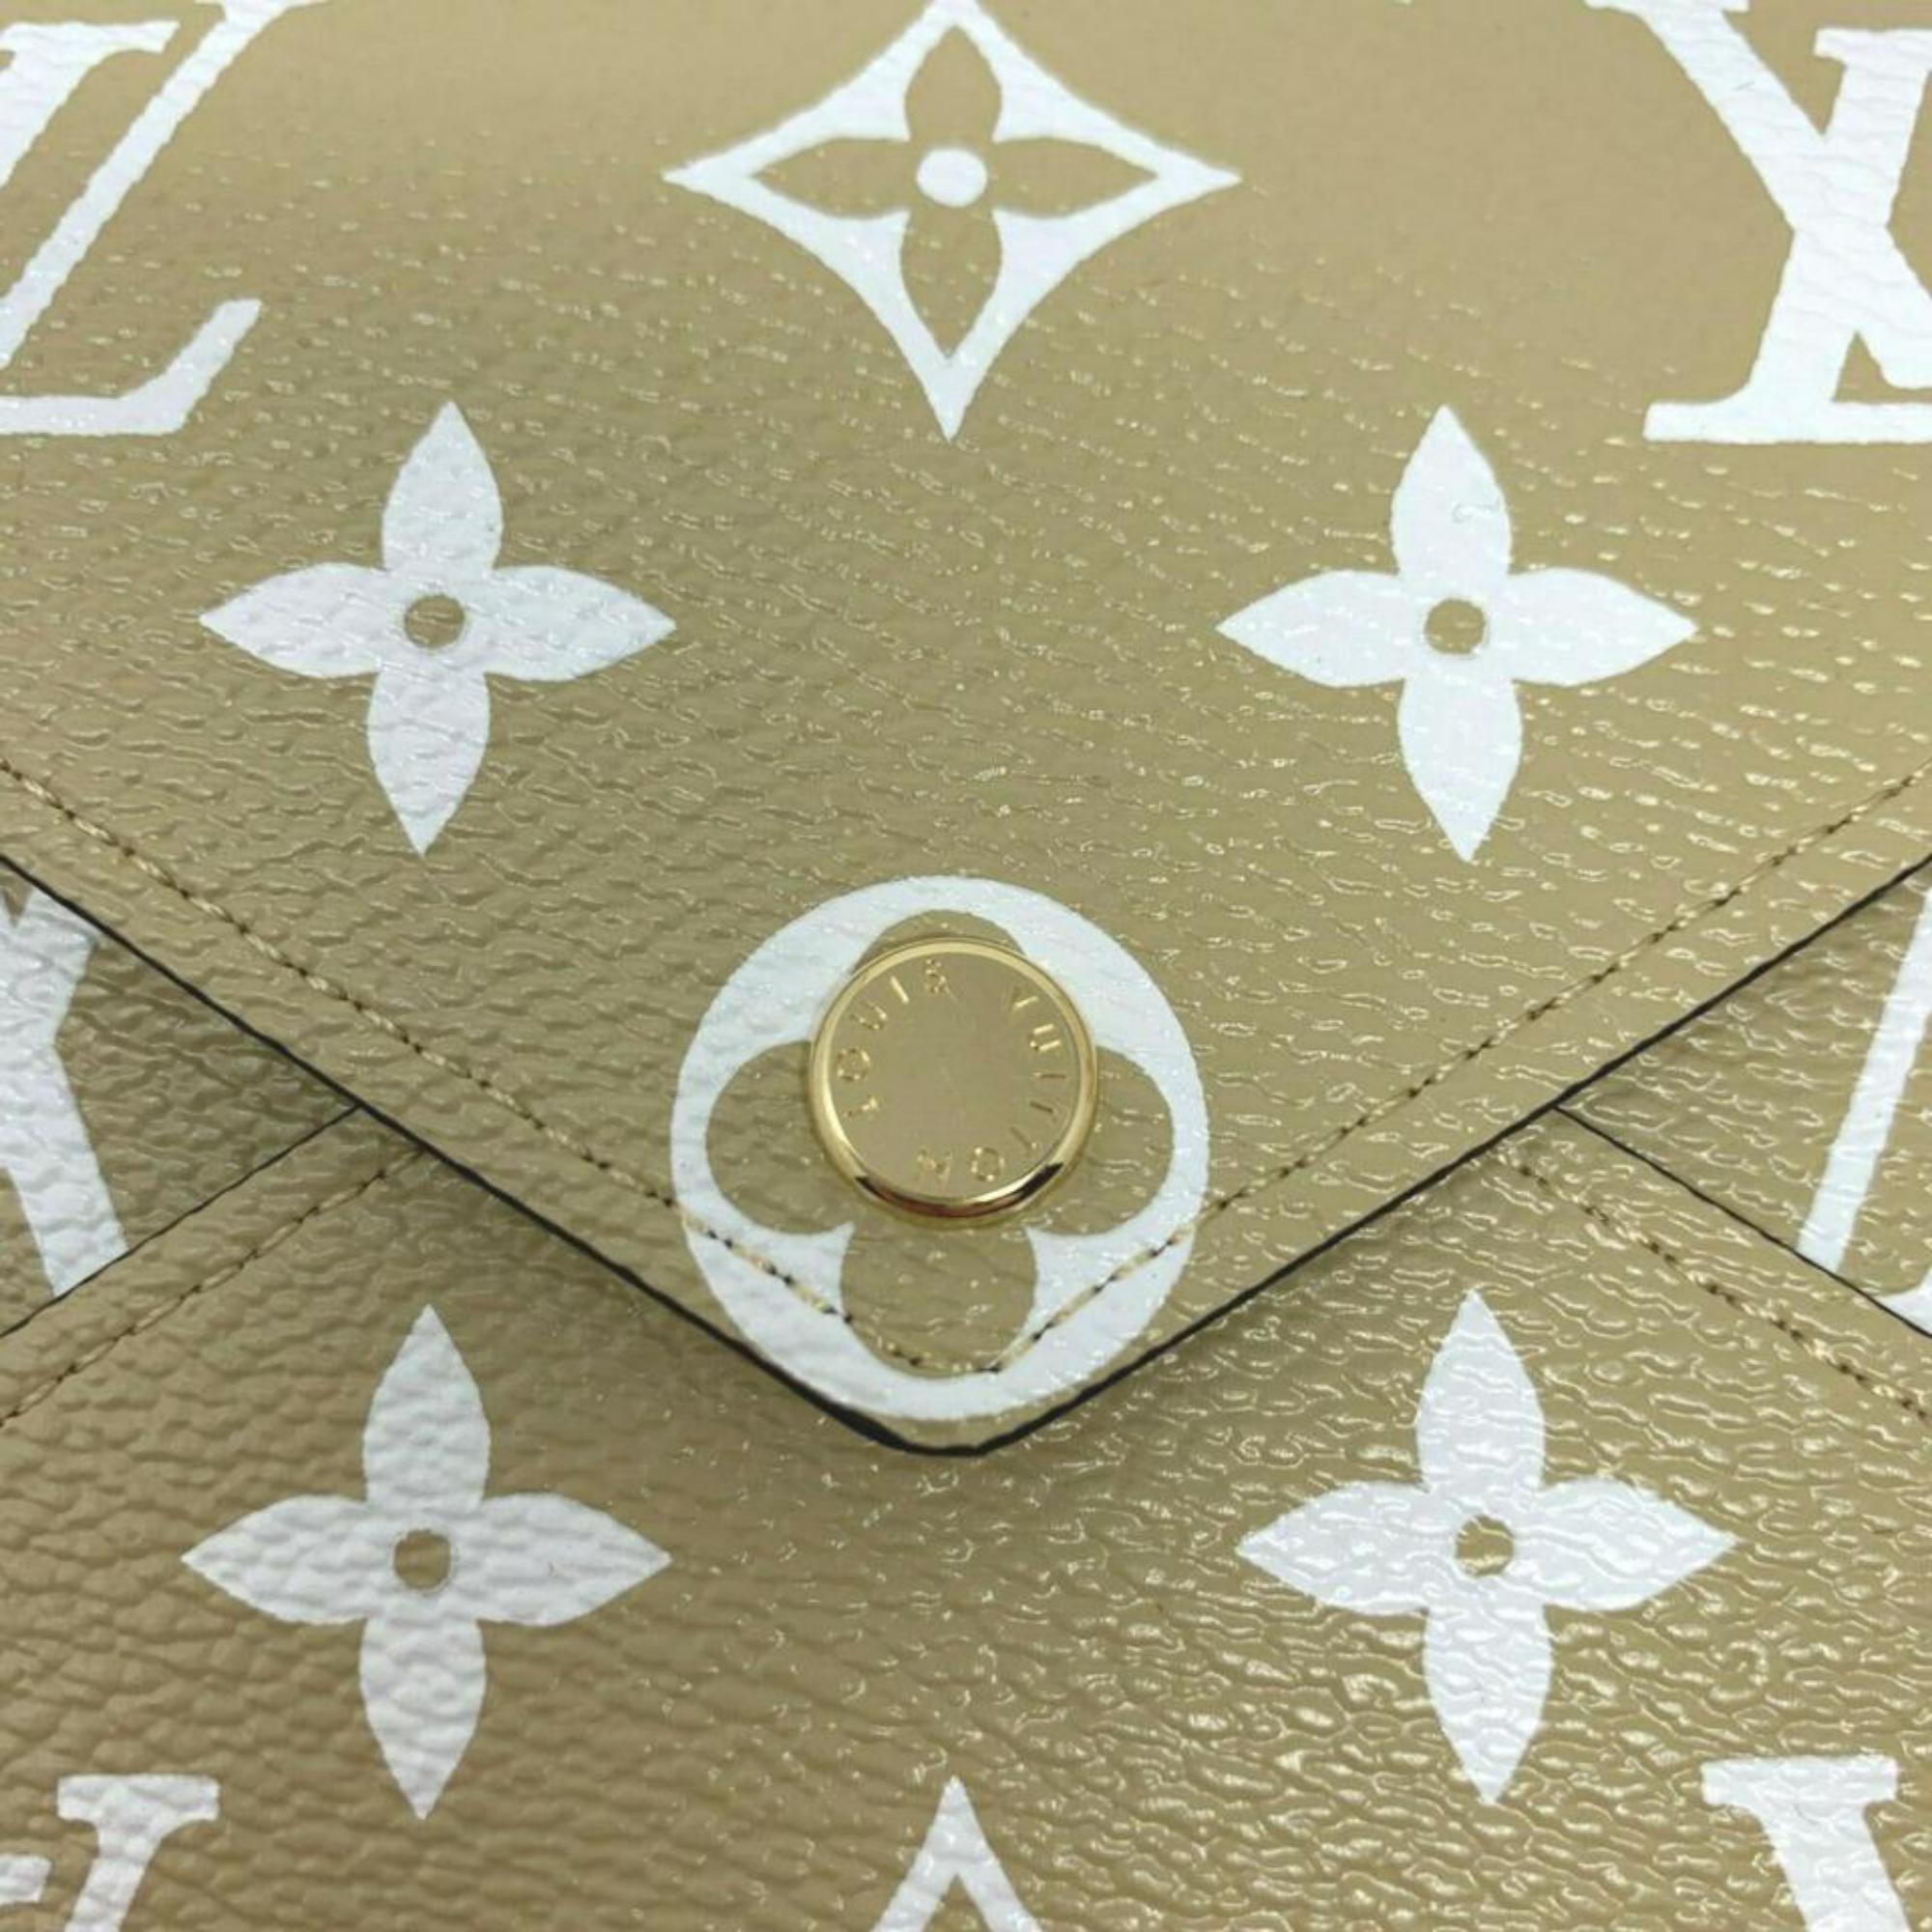 Louis Vuitton Beige Medium Ss19 Limited Edition Giant Kirigami Pouch 870619  For Sale 3